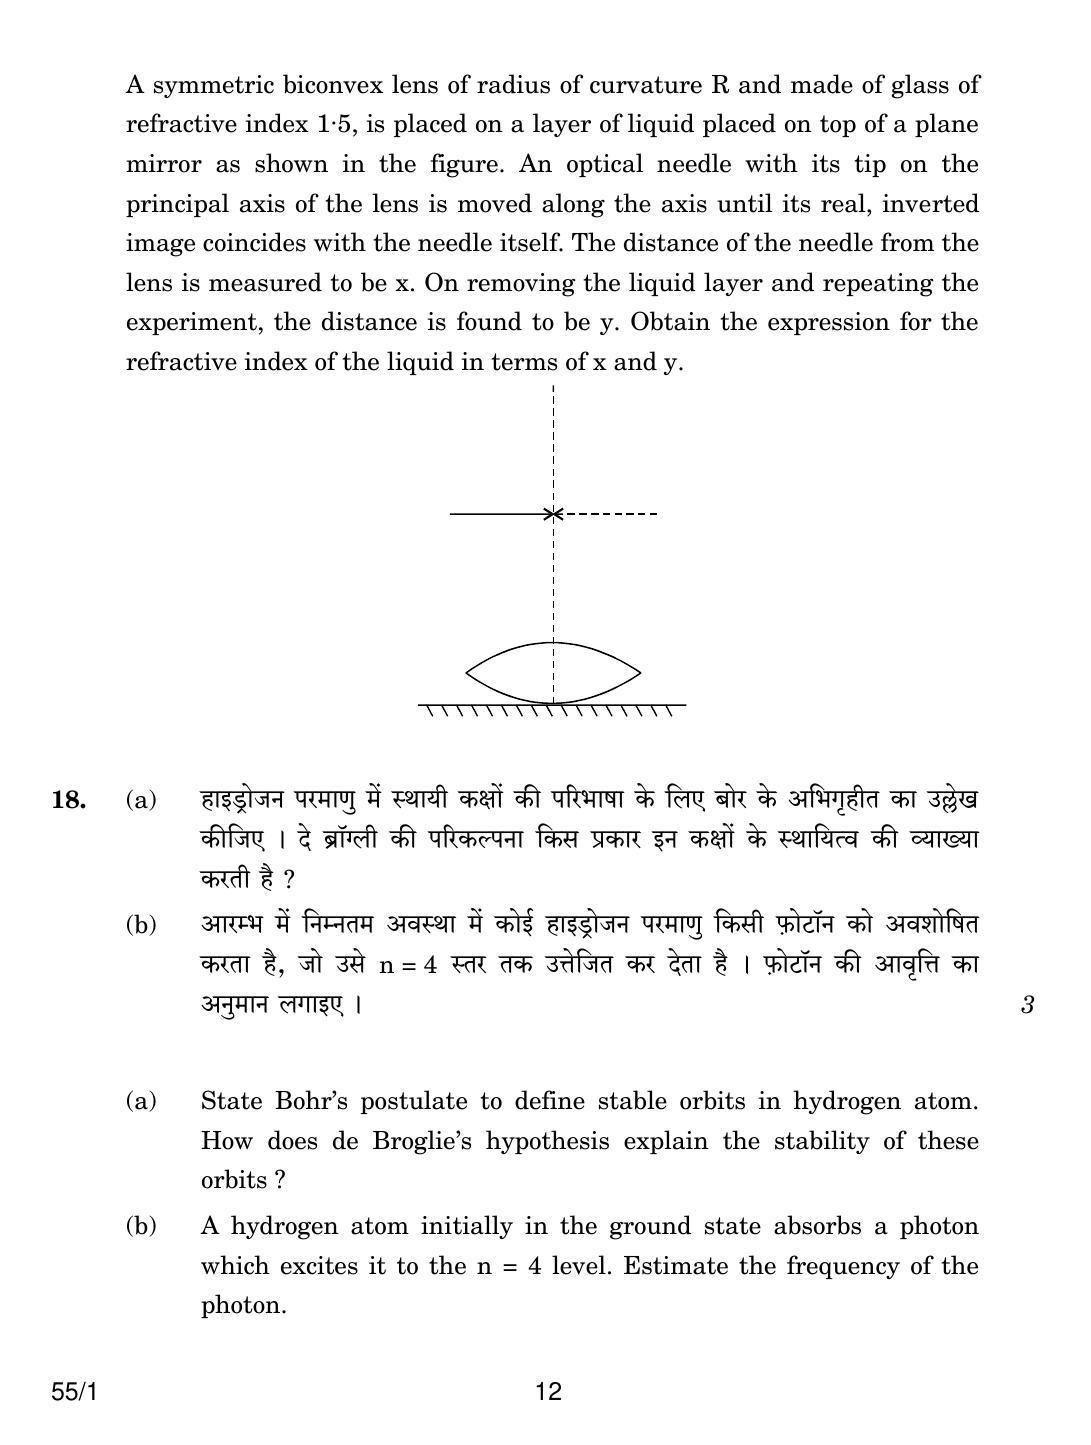 CBSE Class 12 55-1 PHYSICS 2018 Question Paper - Page 12